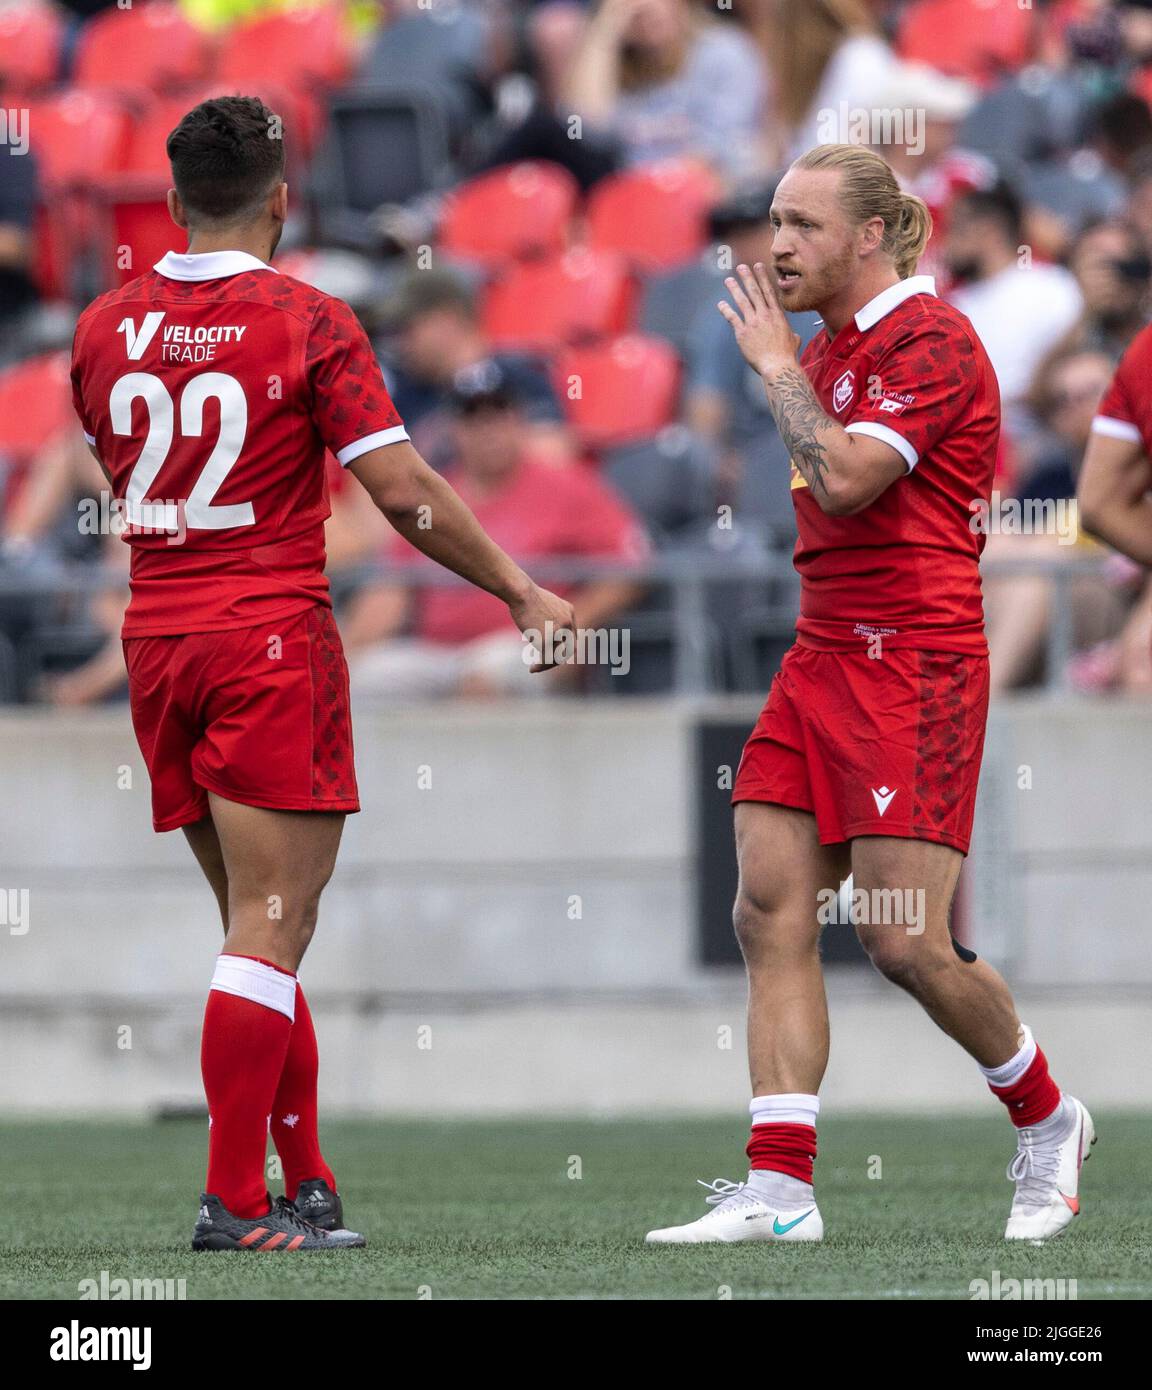 Ottawa, Canada. 10 Jul 2022. G. BOWD (23) of Canada in the Spain at Canada Men’s World Rugby match played at TD Place Stadium in Ottawa, Canada. Spain won the game 57-34.. Credit: Sean Burges/Alamy Live News Stock Photo